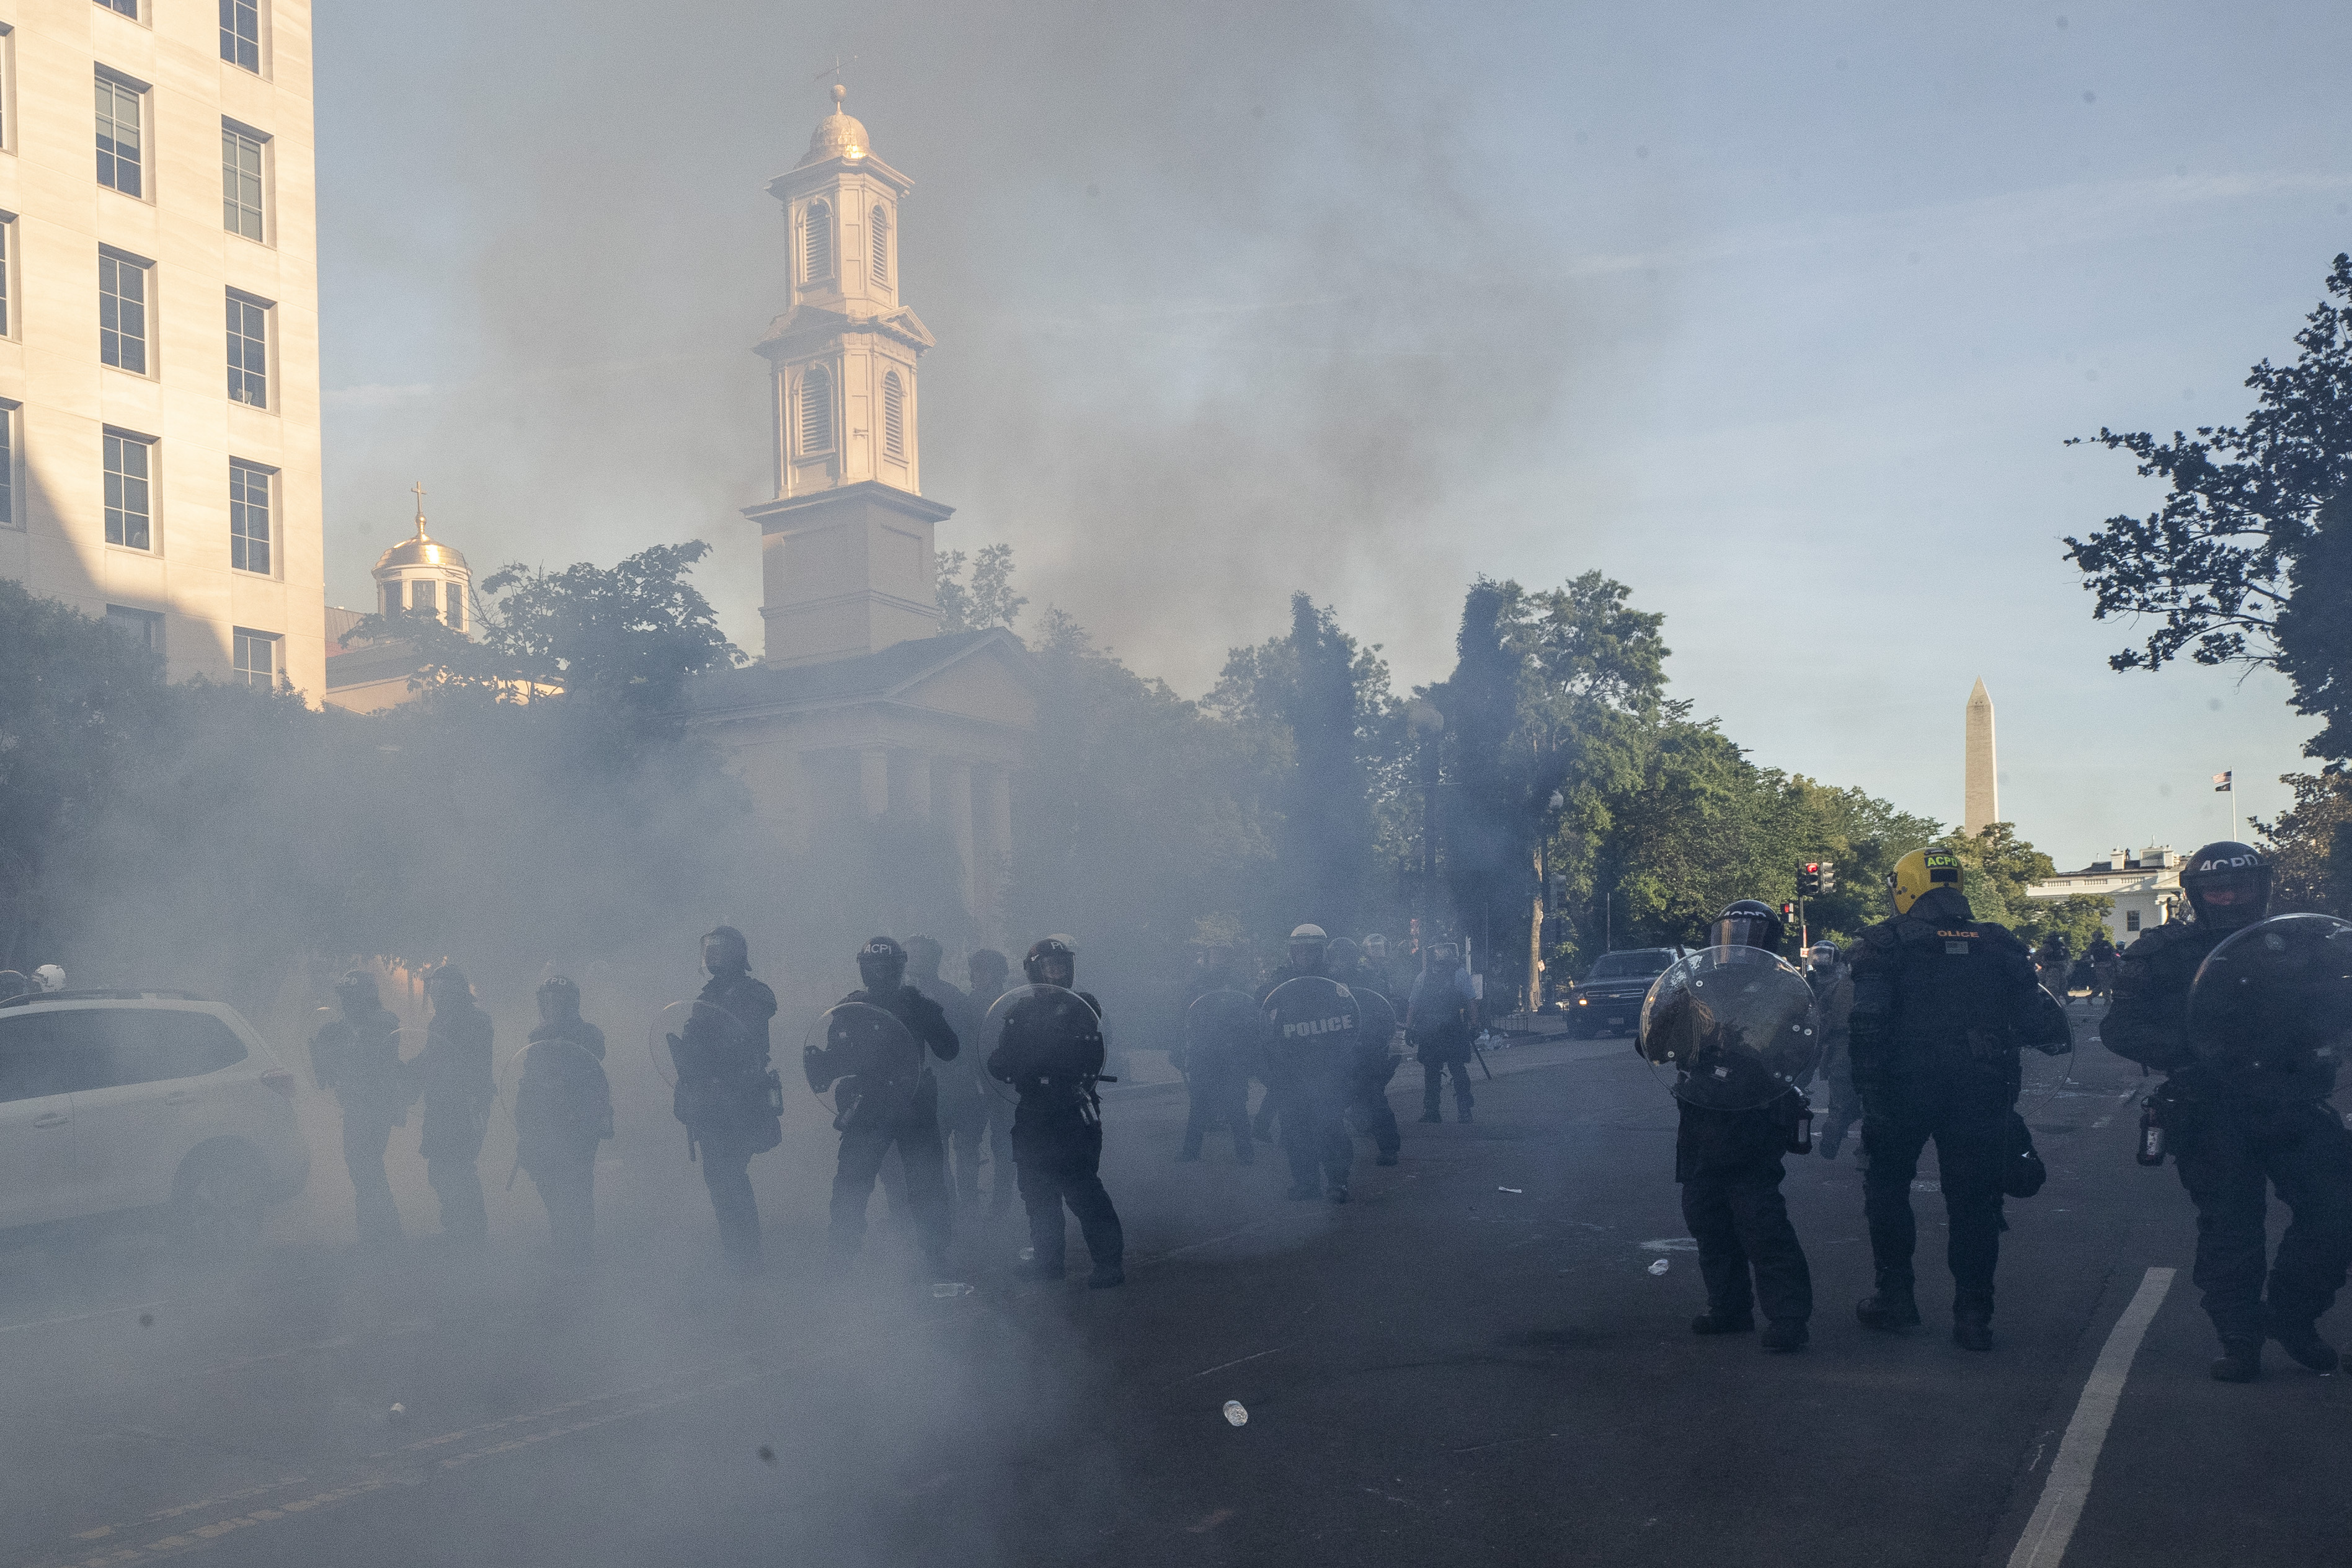 Tear gas floats in the air as a line of police move demonstrators away from St. John's Church across Lafayette Park from the White House, as they gather to protest the death of George Floyd, Monday, June 1, 2020, in Washington. (Alex Brandon–AP)